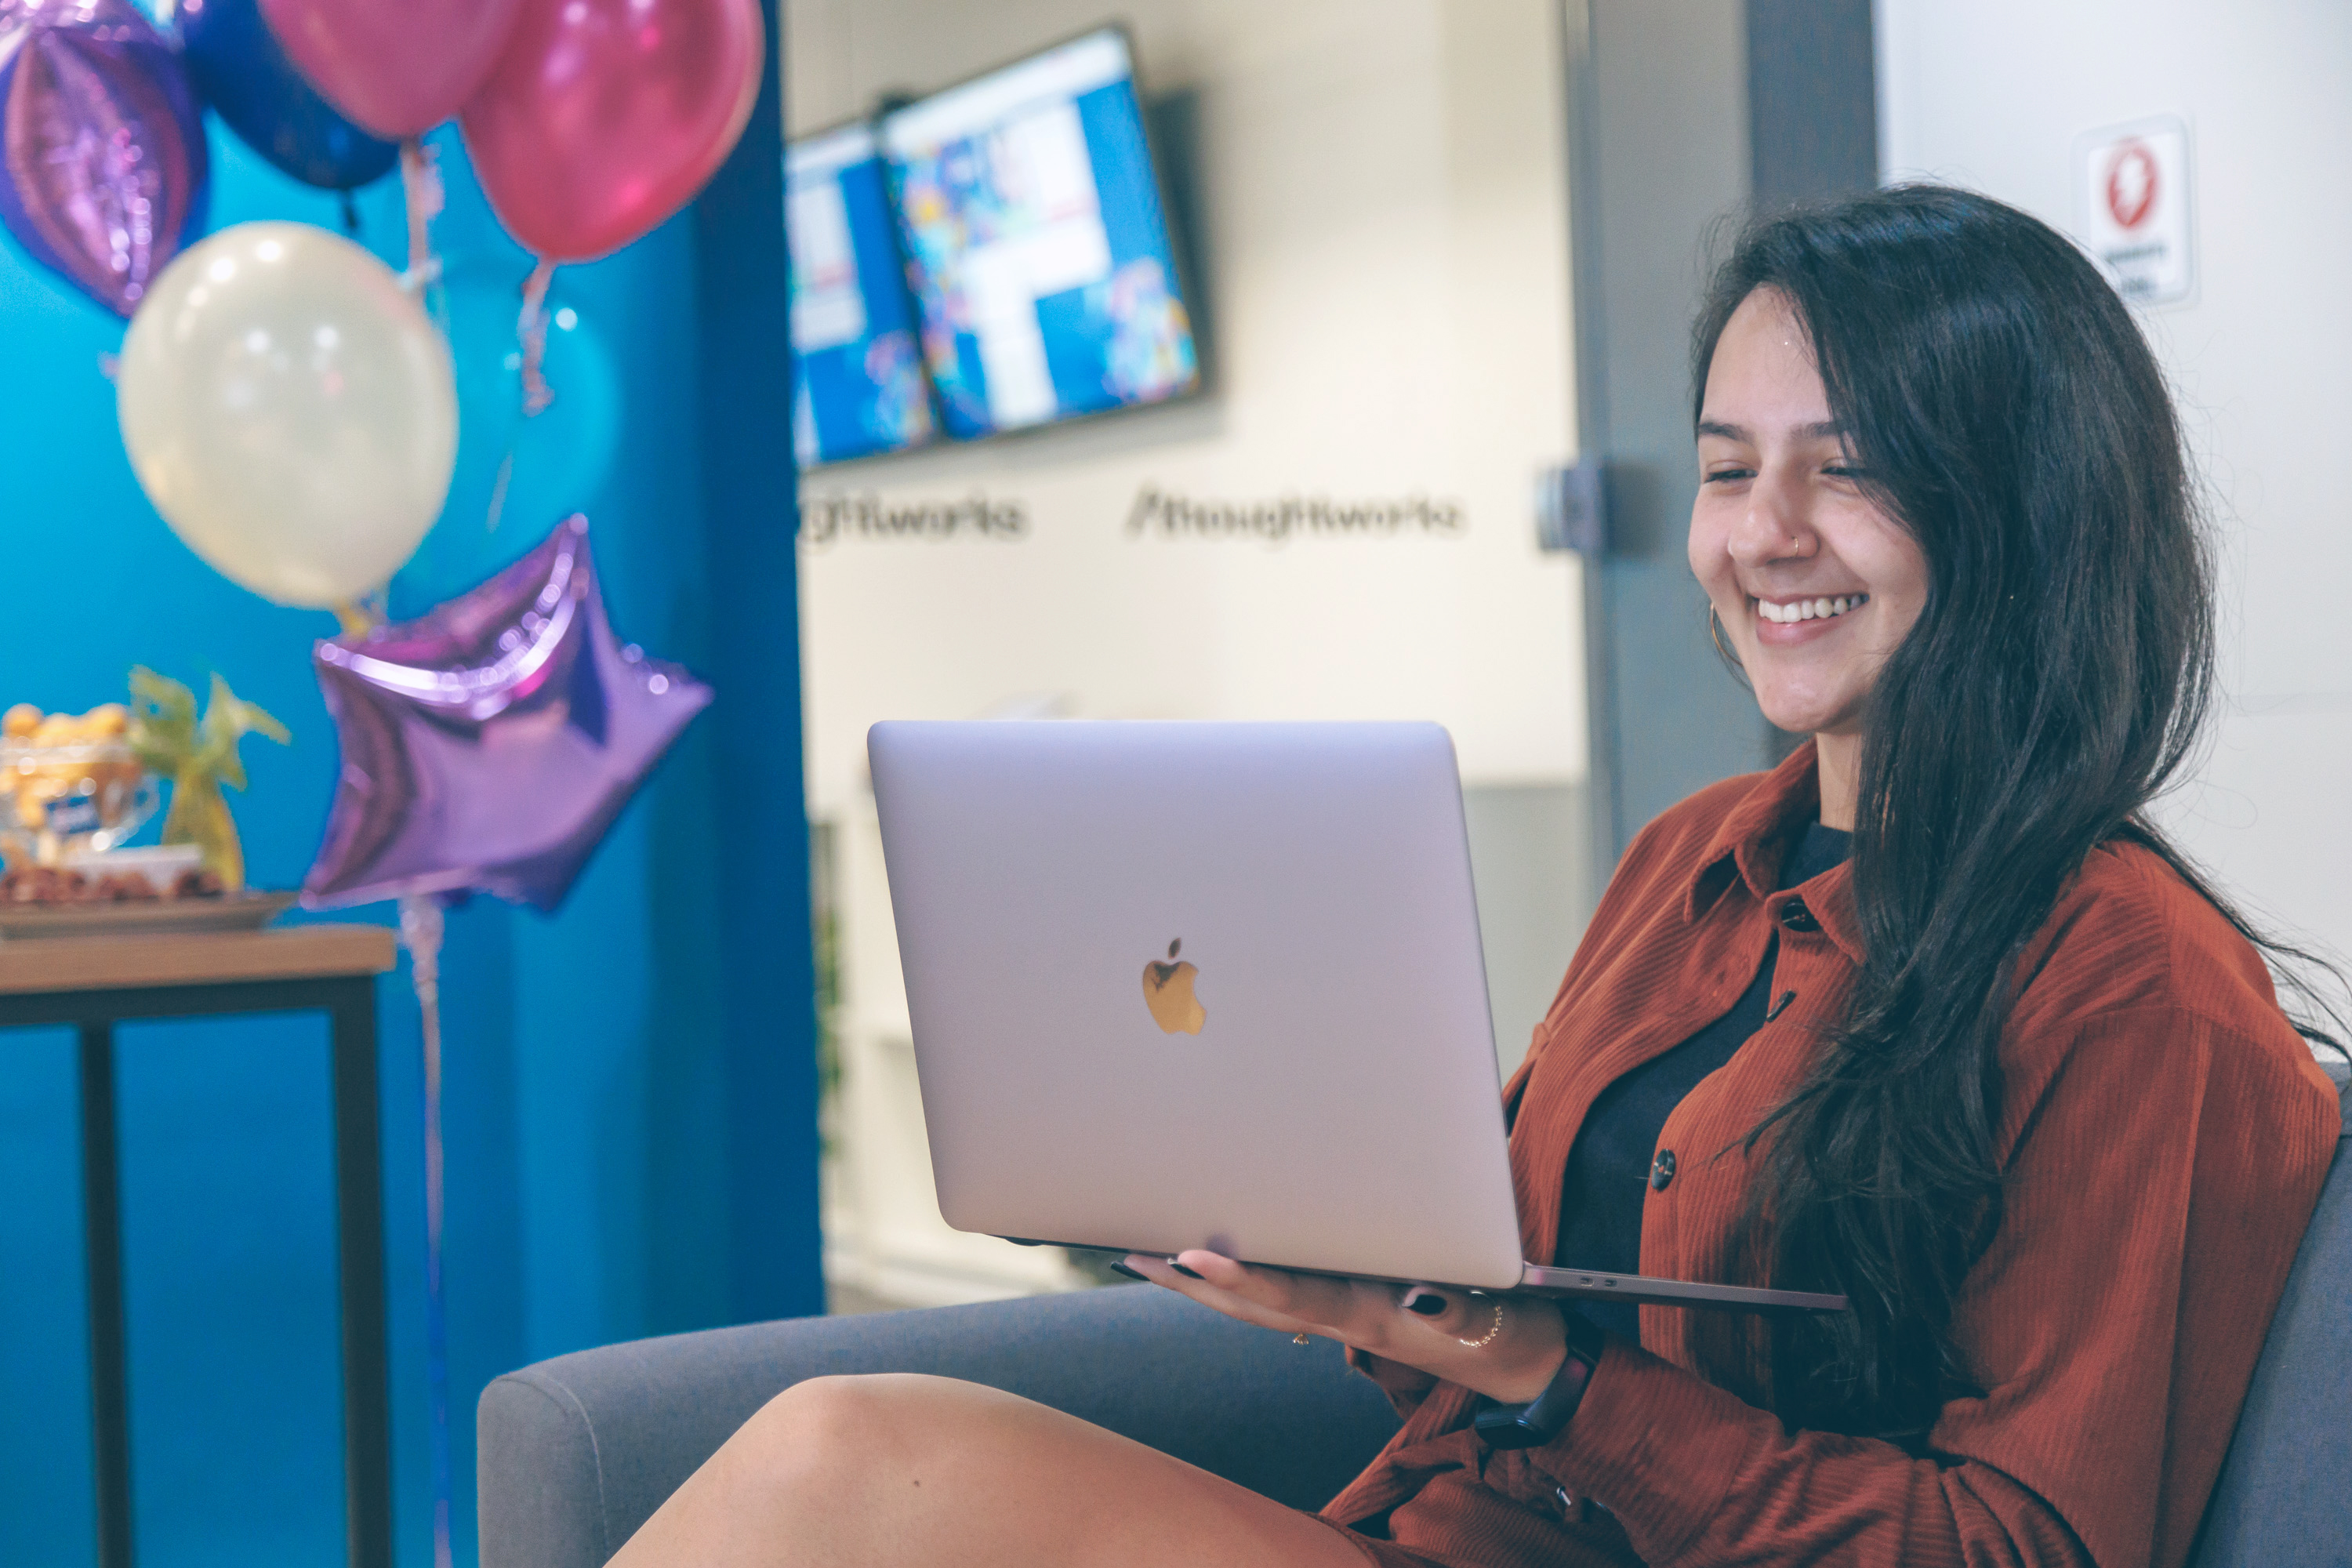 Woman smiling and sitting on a gray sofa with a laptop on her lap. In the background of the image, there is the Thoughtworks office in Porto Alegre, with balloons and a table on her left side.